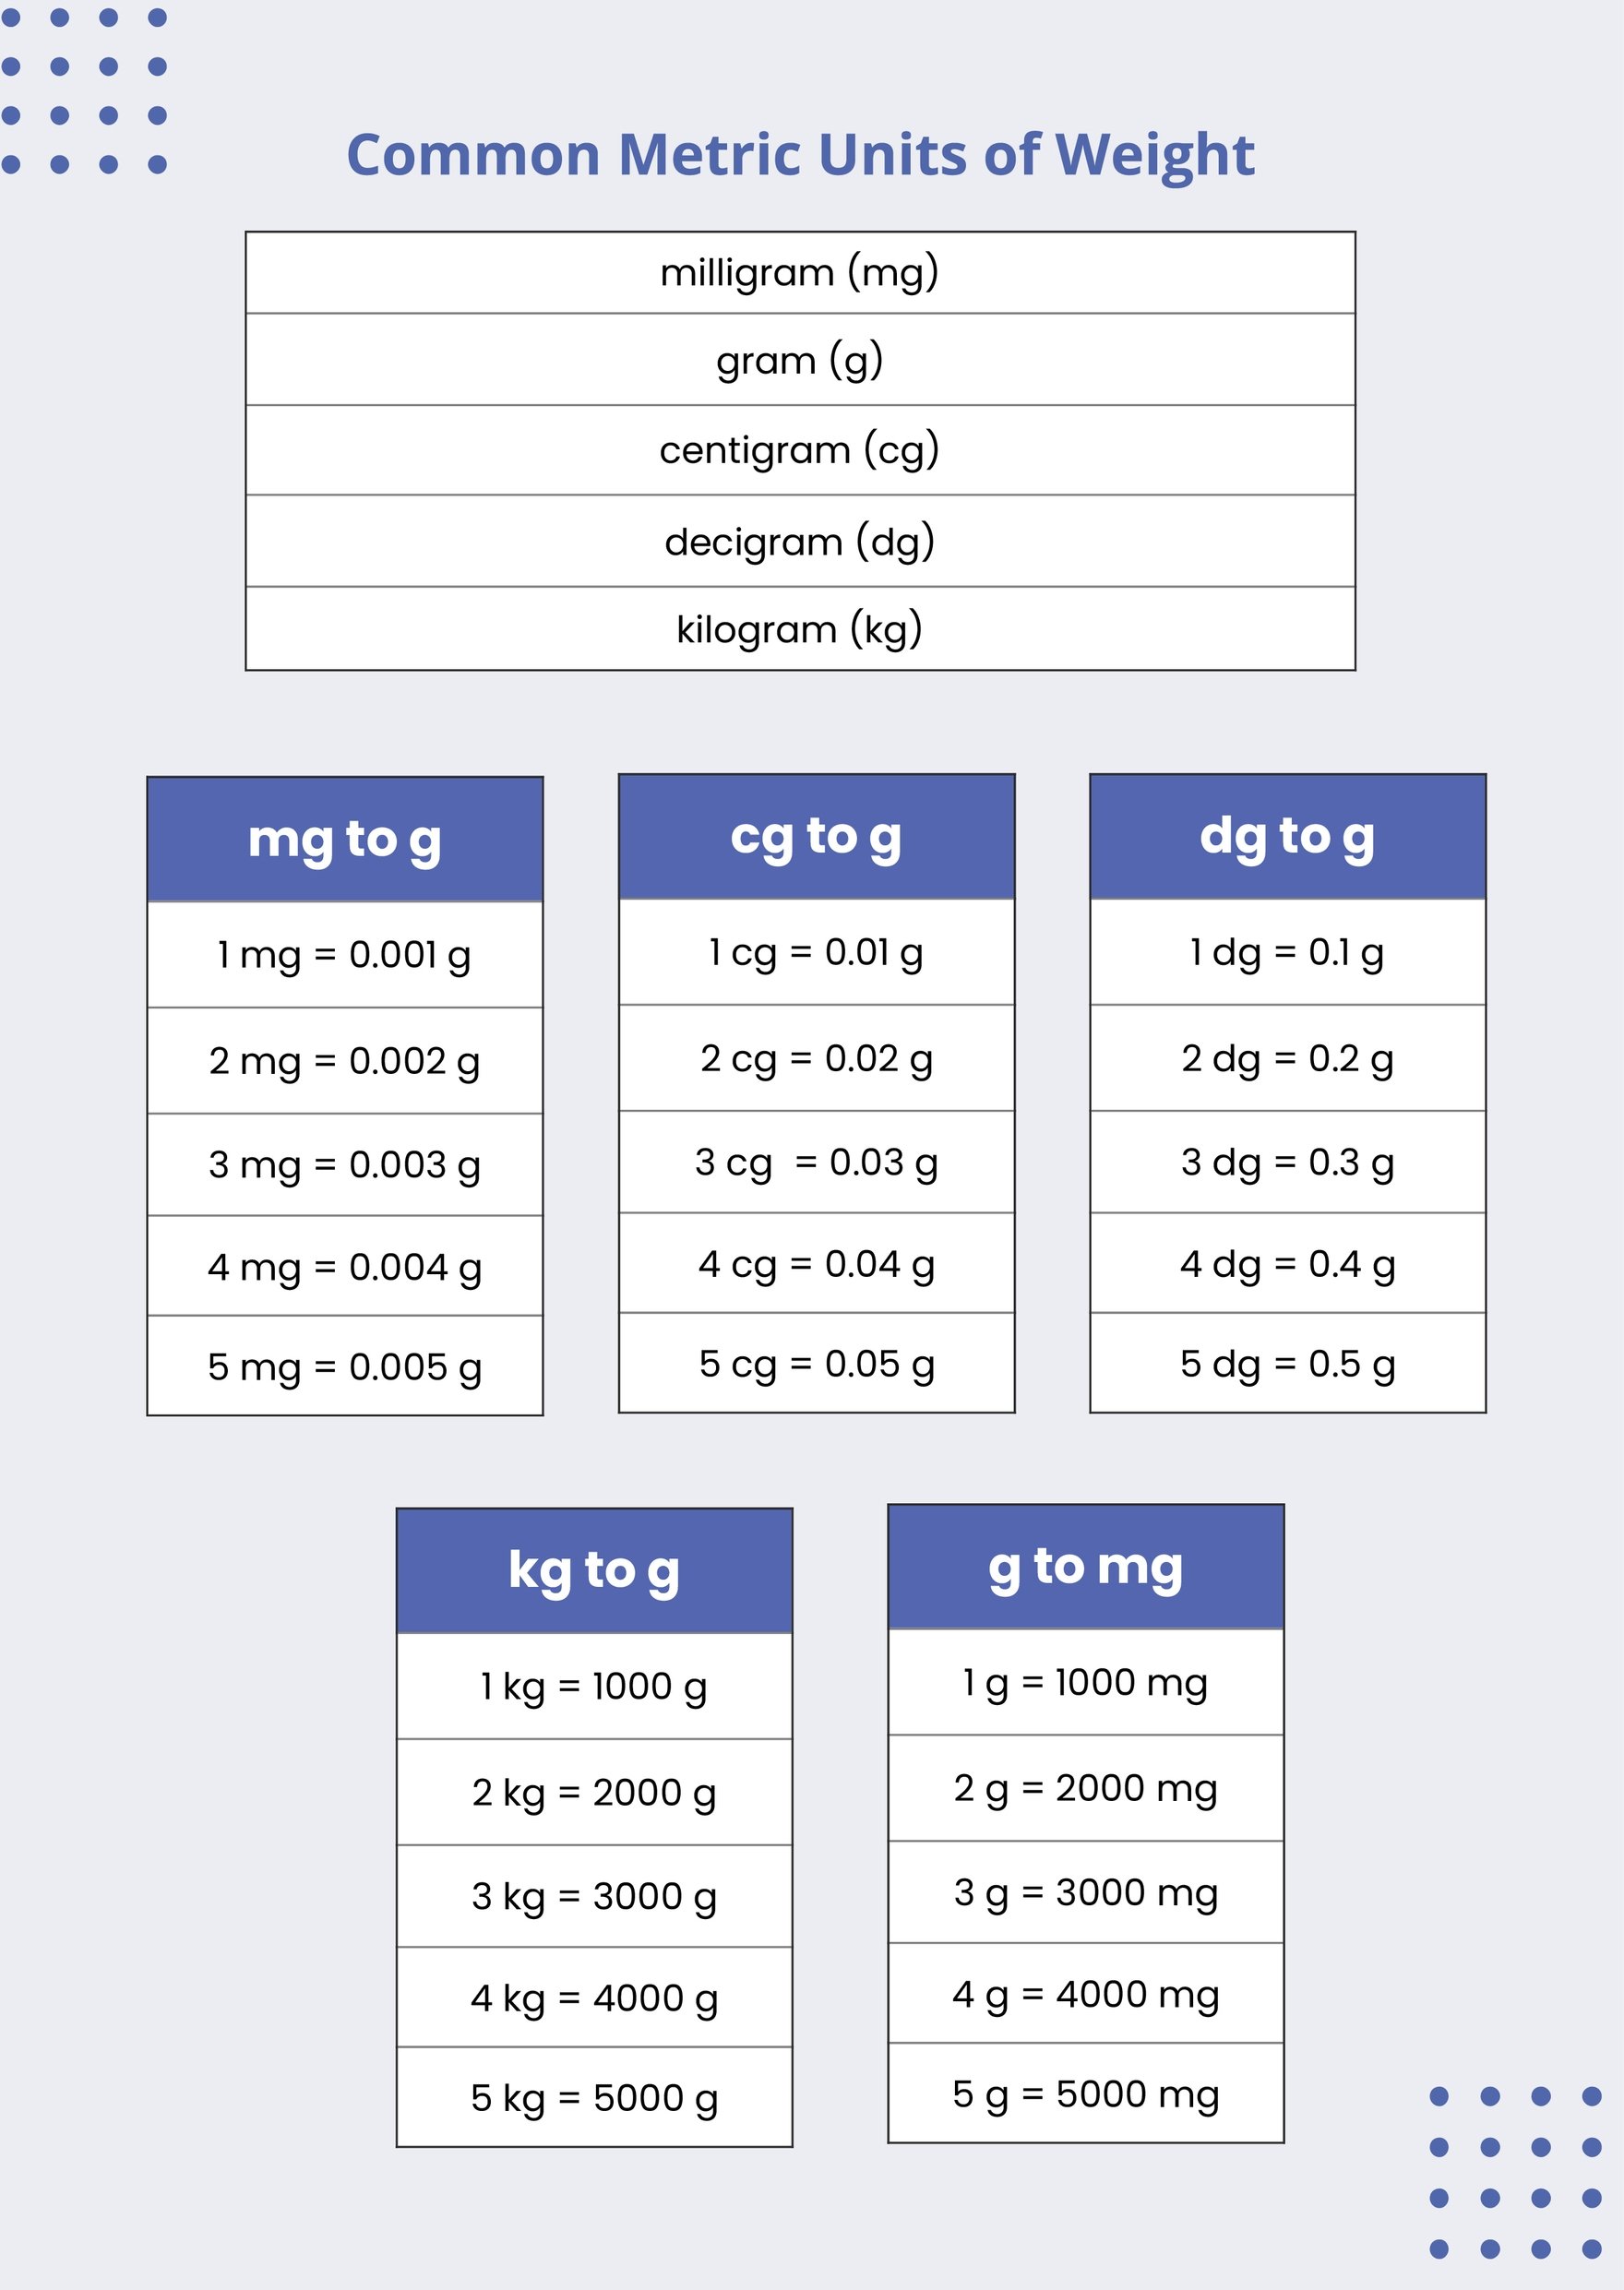 Free Metric Units Of Weight Conversion Chart in PDF, Illustrator